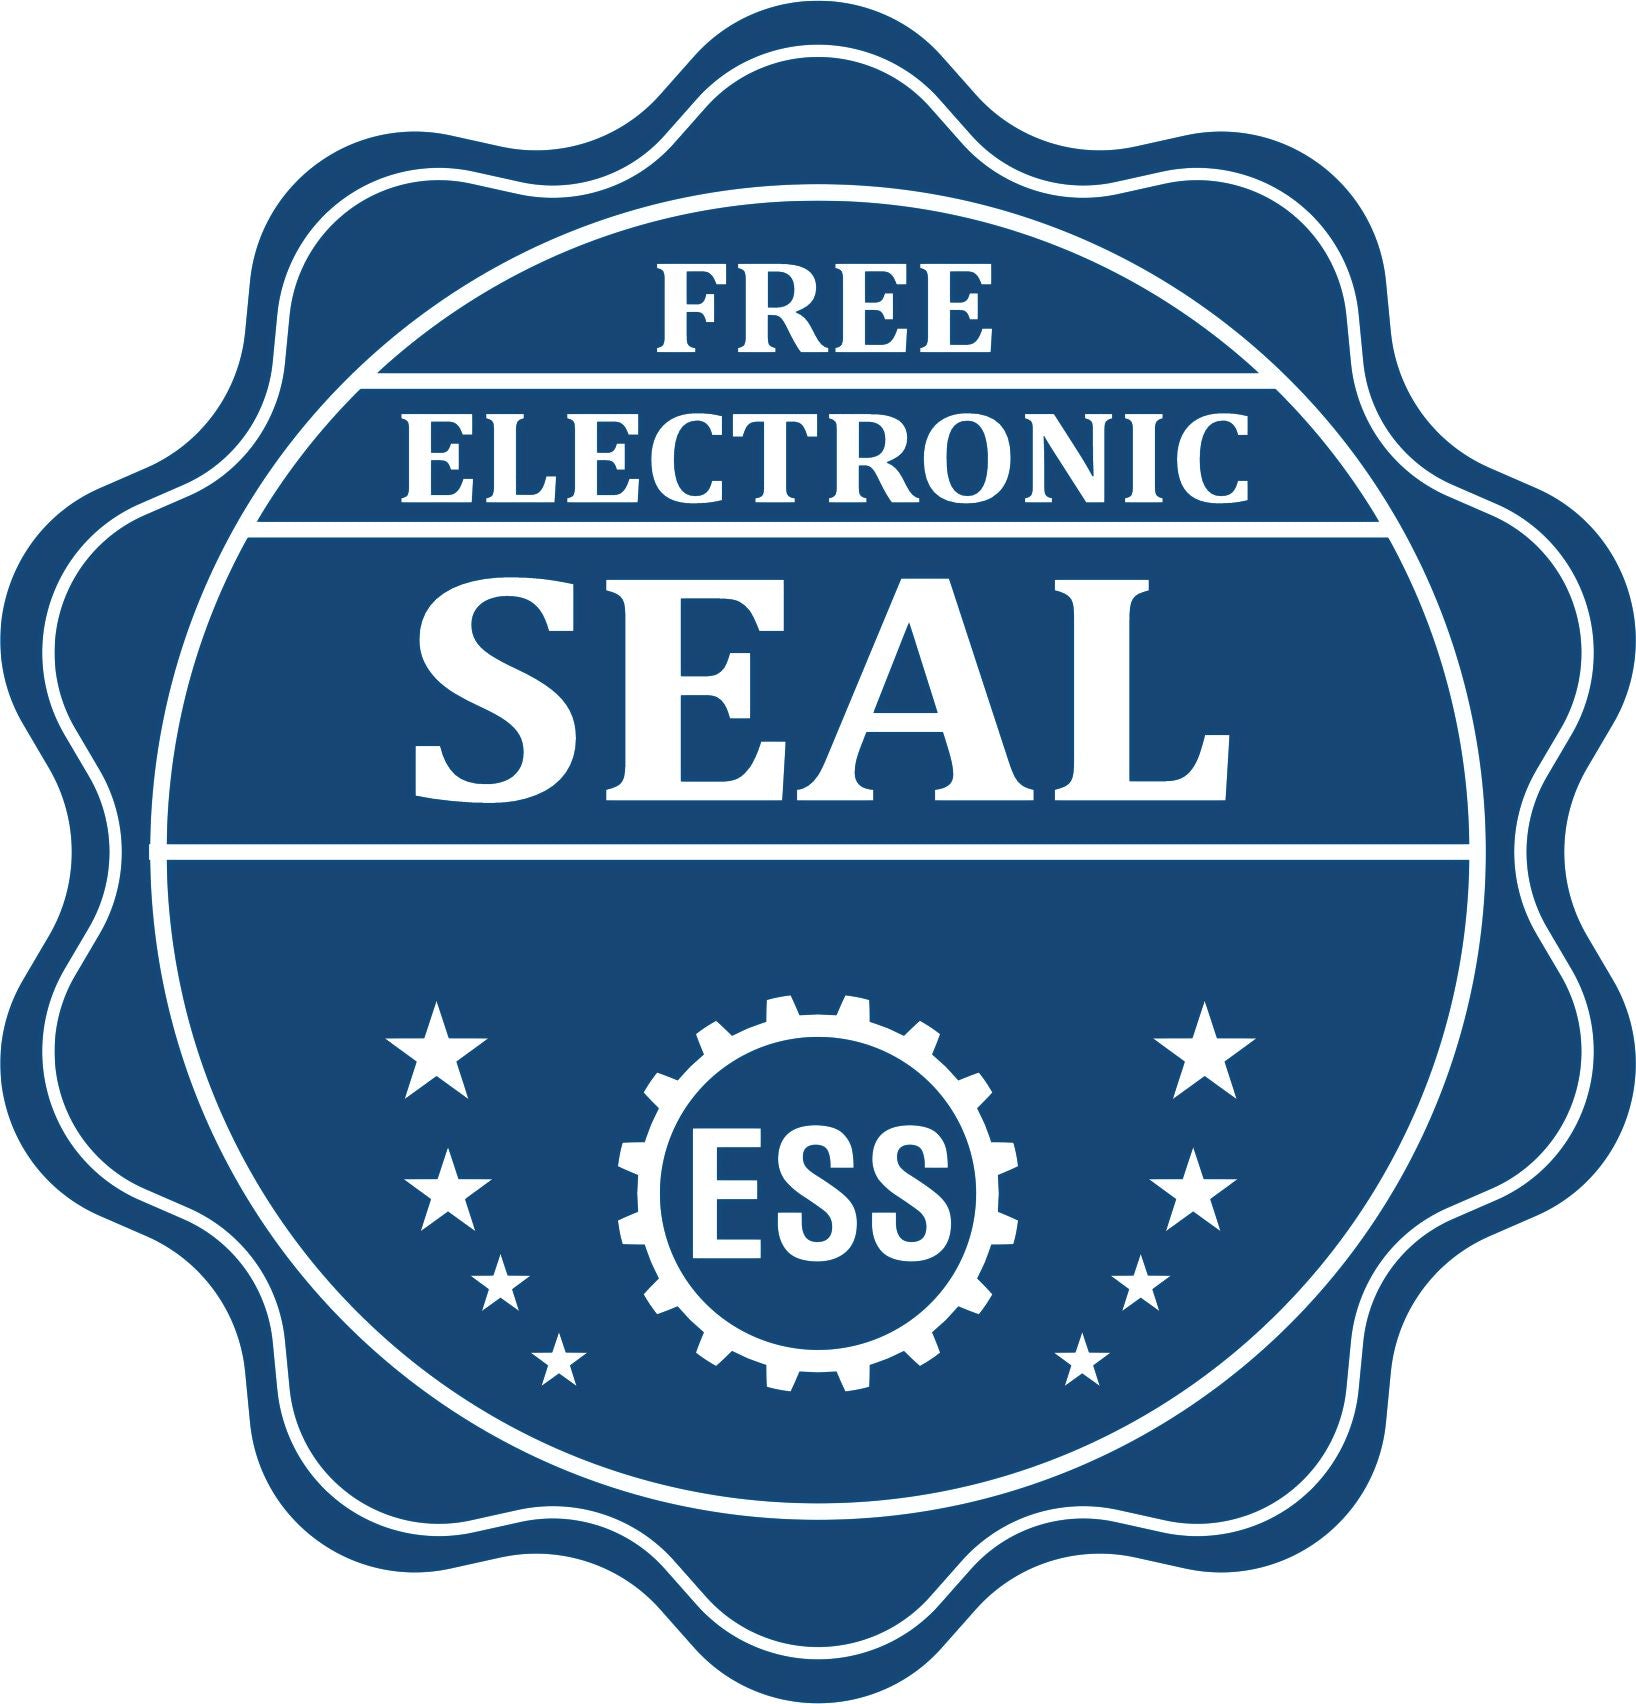 A badge showing a free electronic seal for the Premium MaxLight Pre-Inked Wisconsin Engineering Stamp with stars and the ESS gear on the emblem.